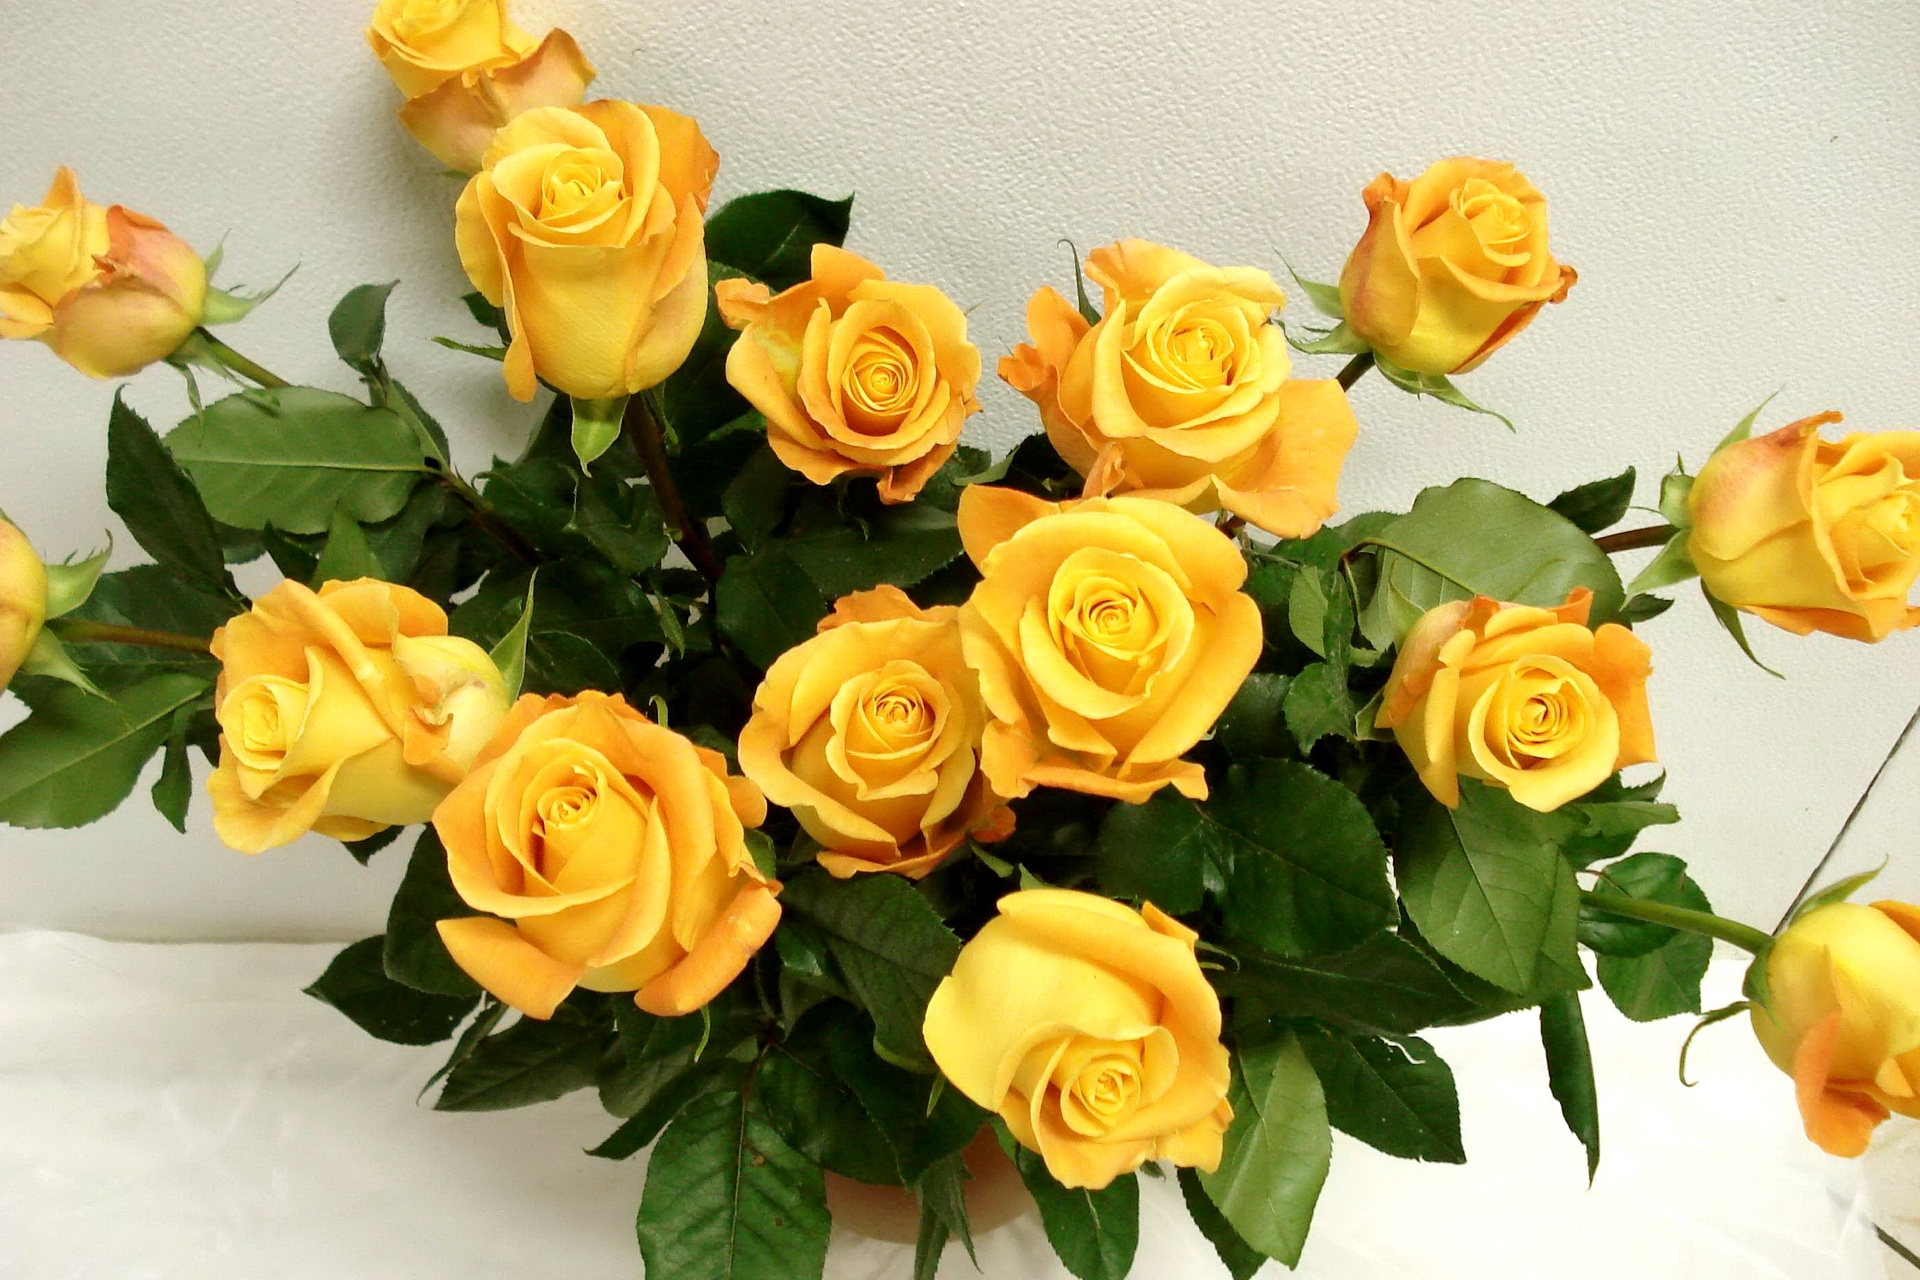 bouquet, roses, flowers, yellow, vase, gorgeous, chic mobile wallpaper